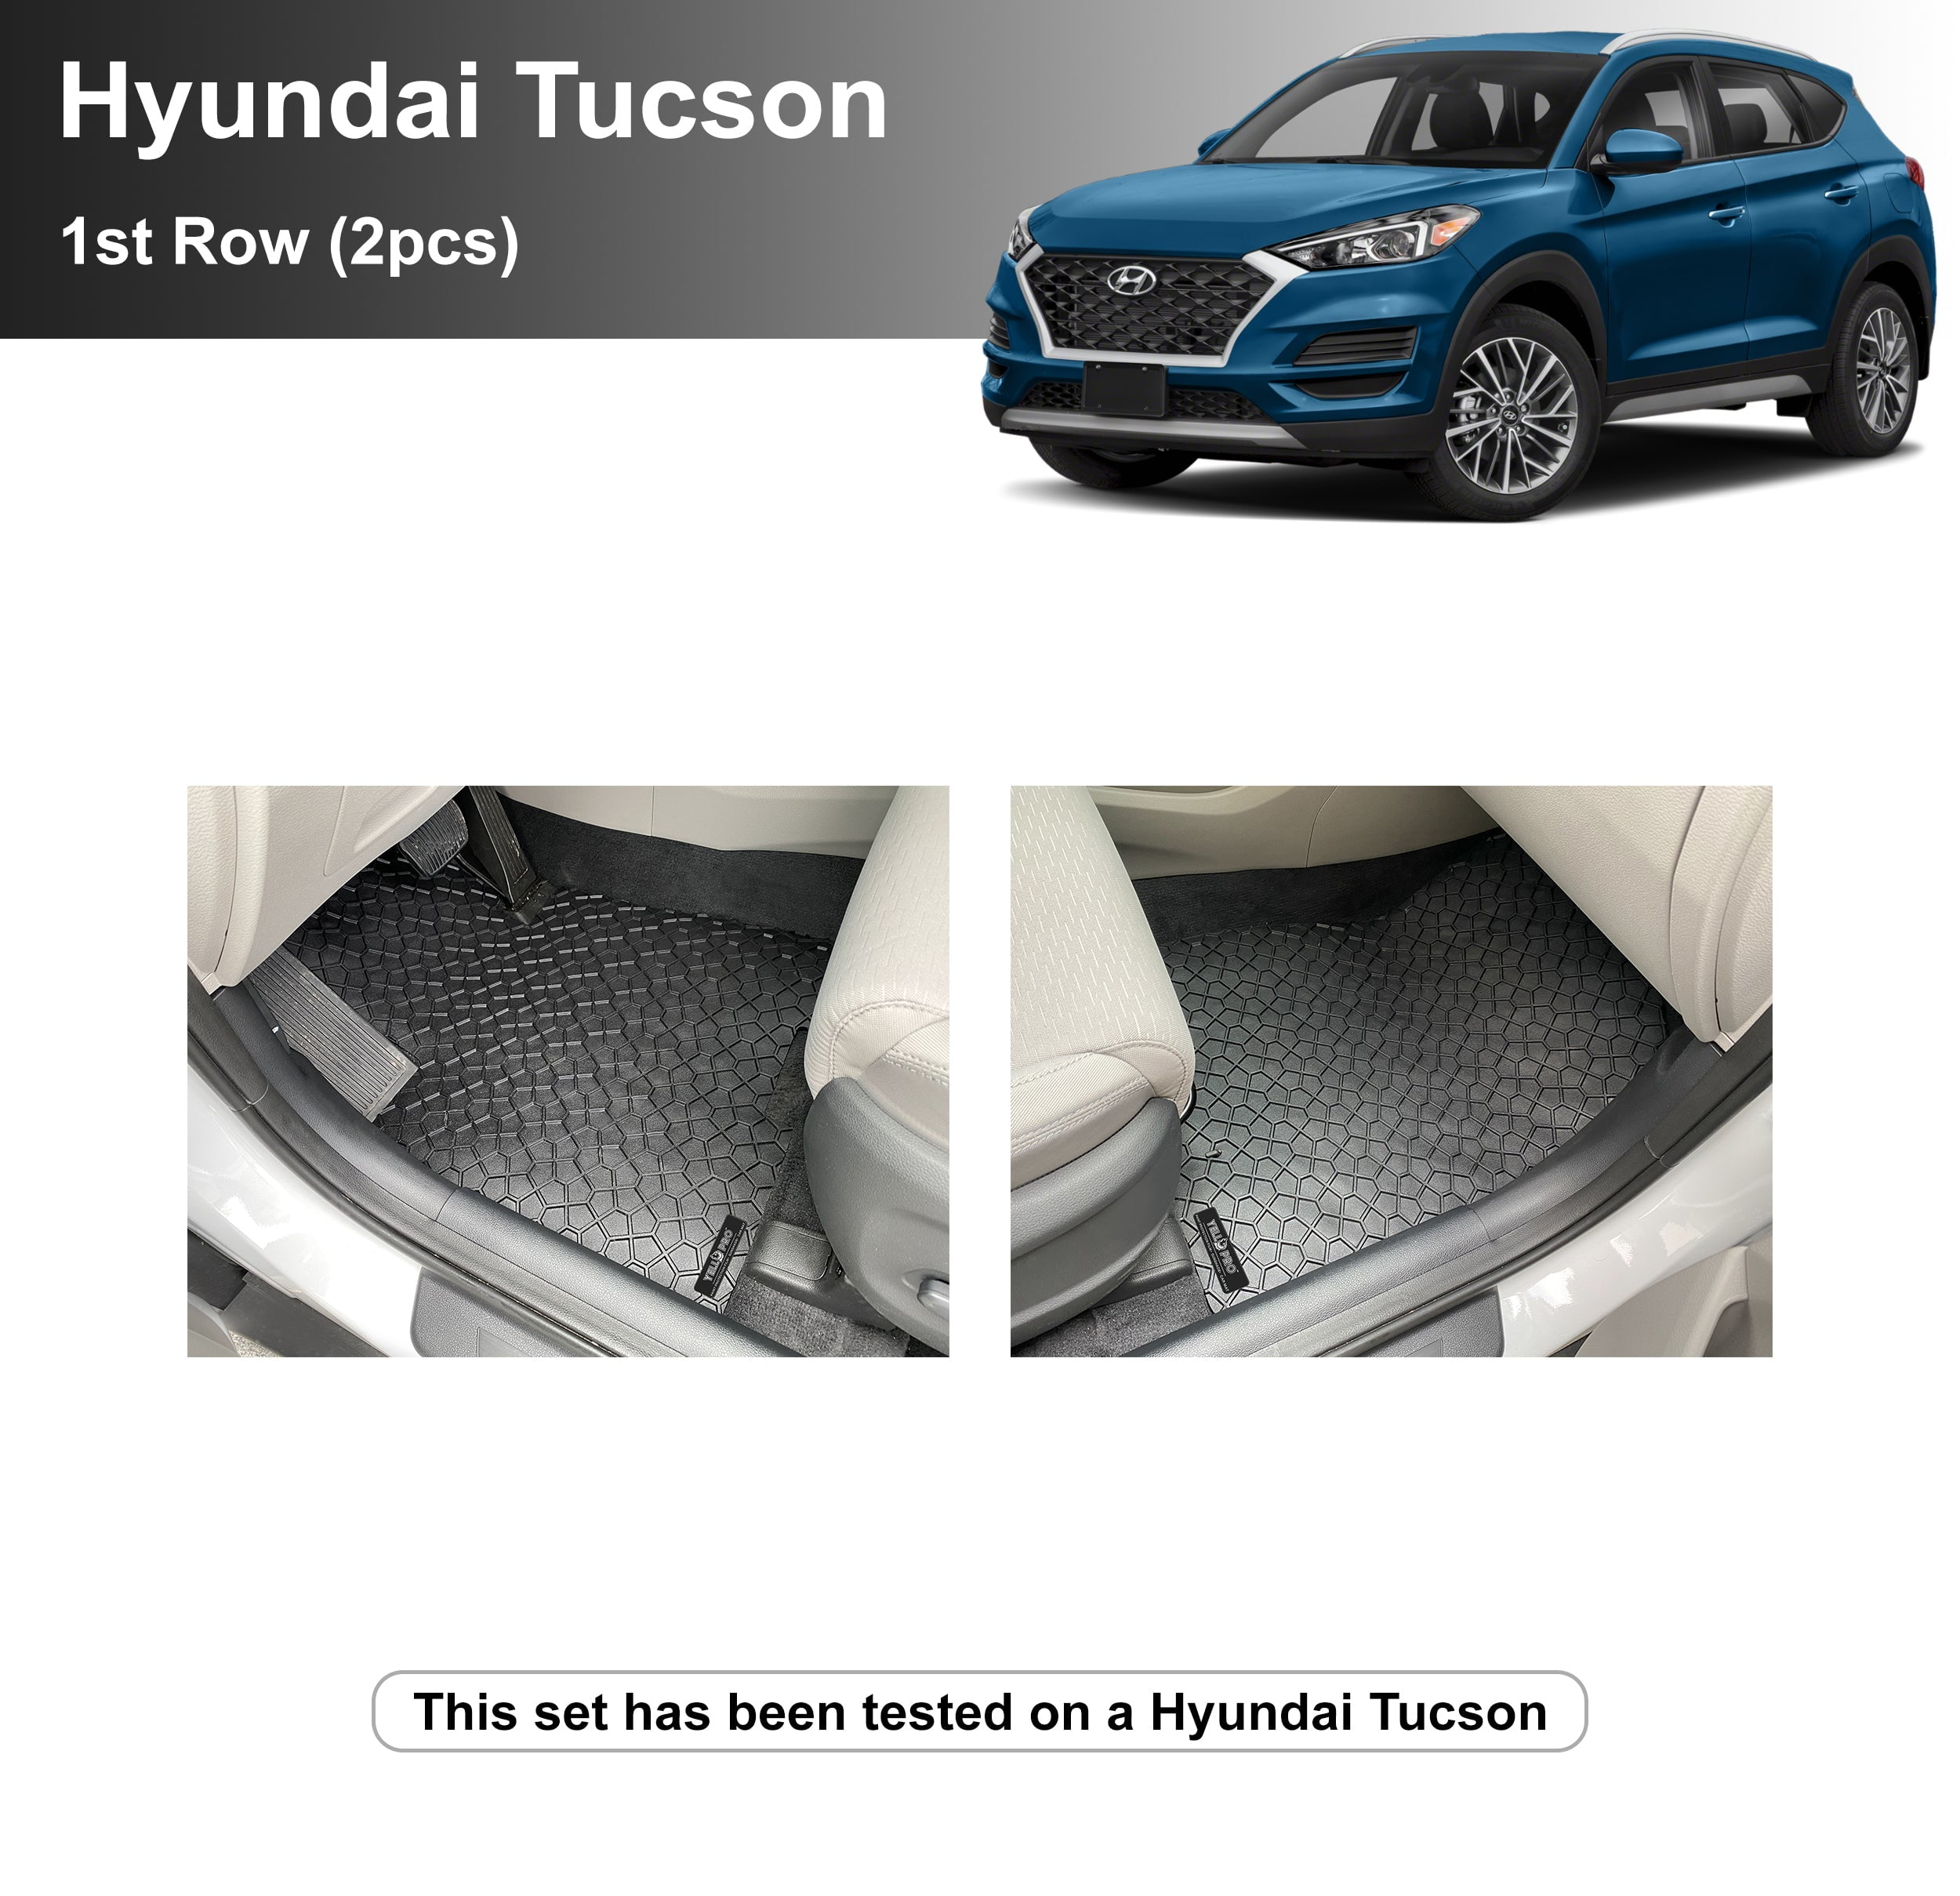 15 on Hyundai Tucson HEAVY DUTY CAR BOOT LINER COVER PROTECTOR MAT